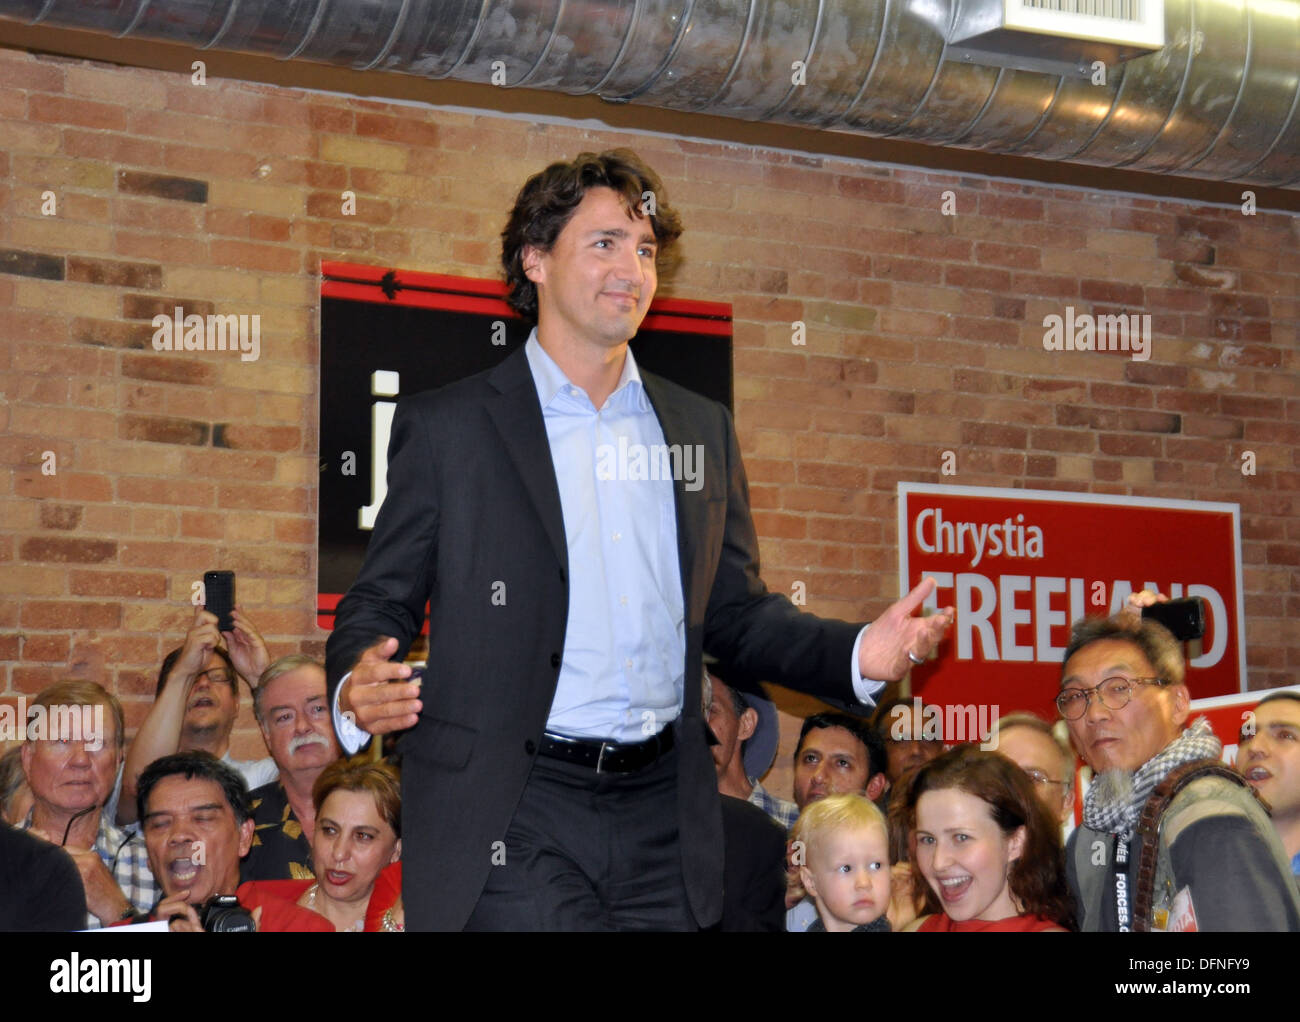 Justin Trudeau at a Liberal event Stock Photo